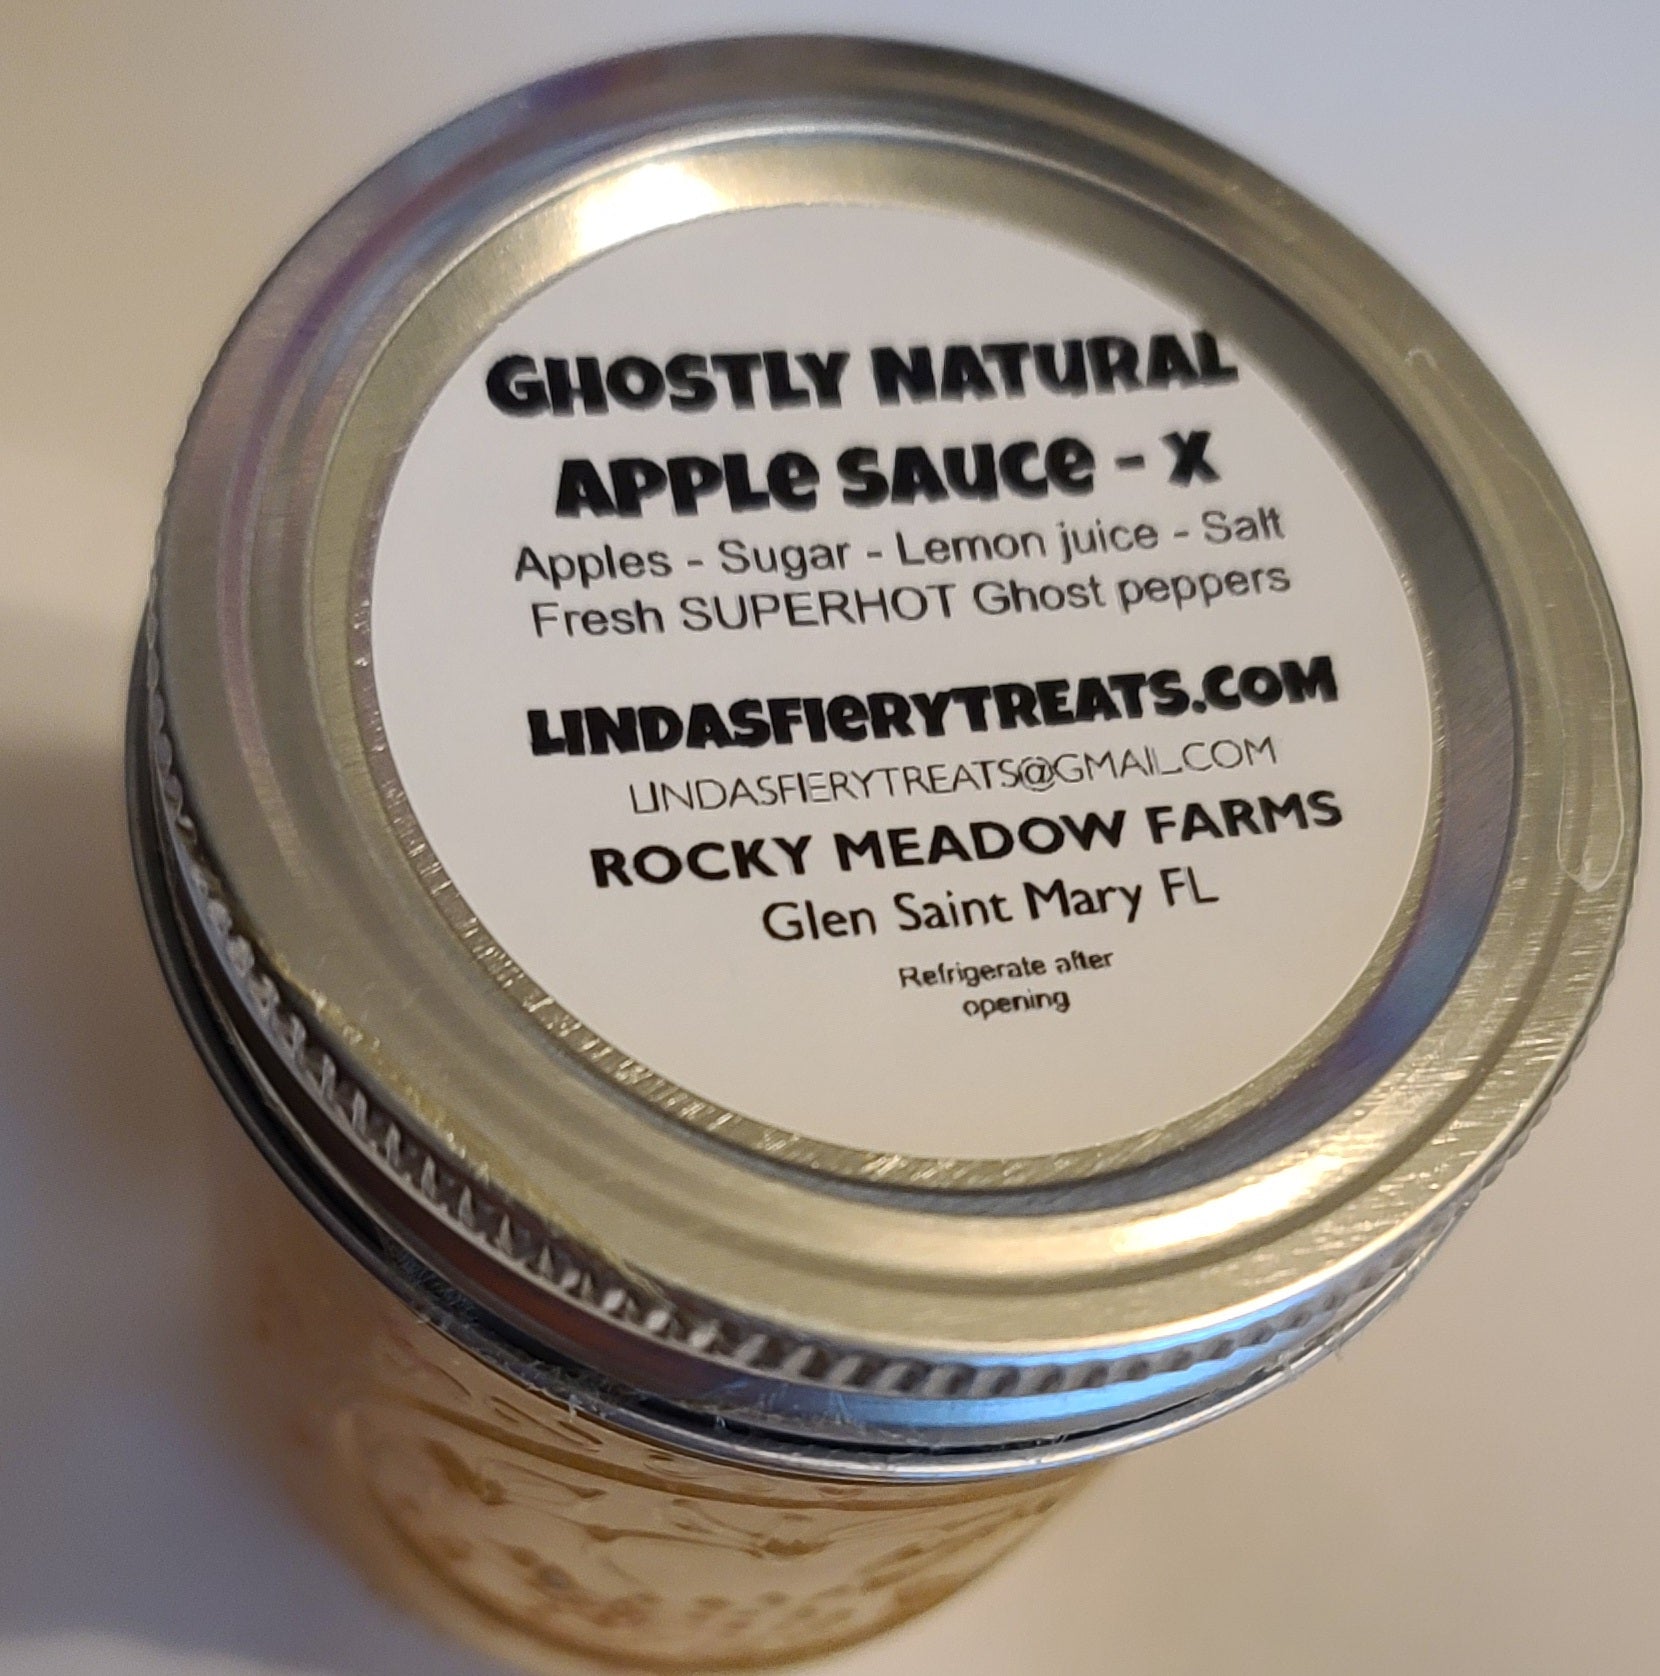 JAM - Ghostly natural apple sauce - X